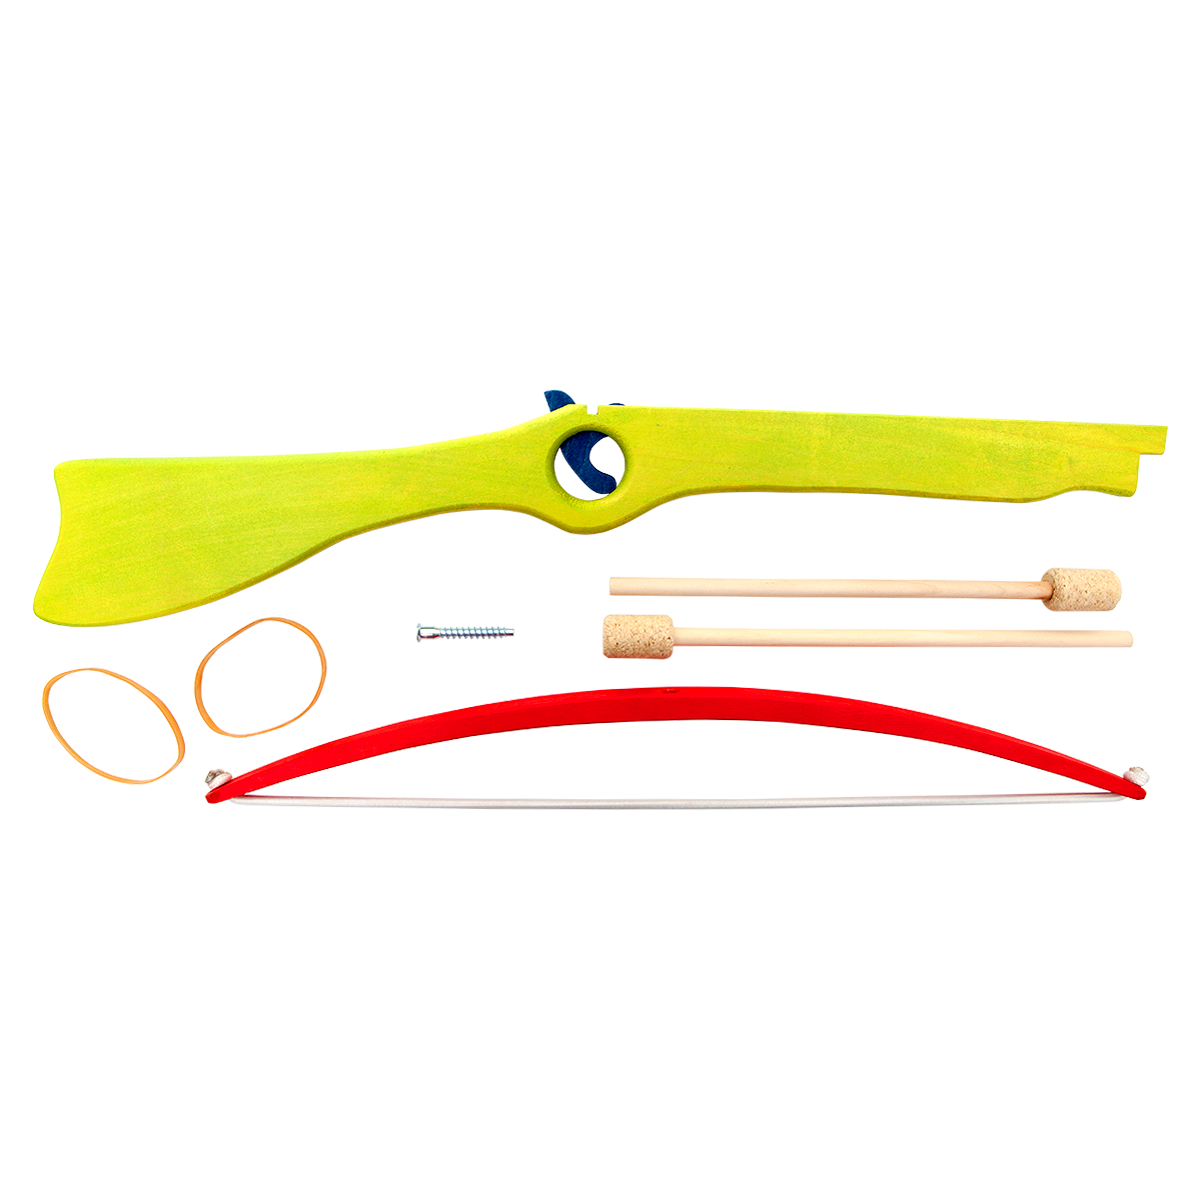 Different components and parts of our green wooden toy crossbow with cork arrows